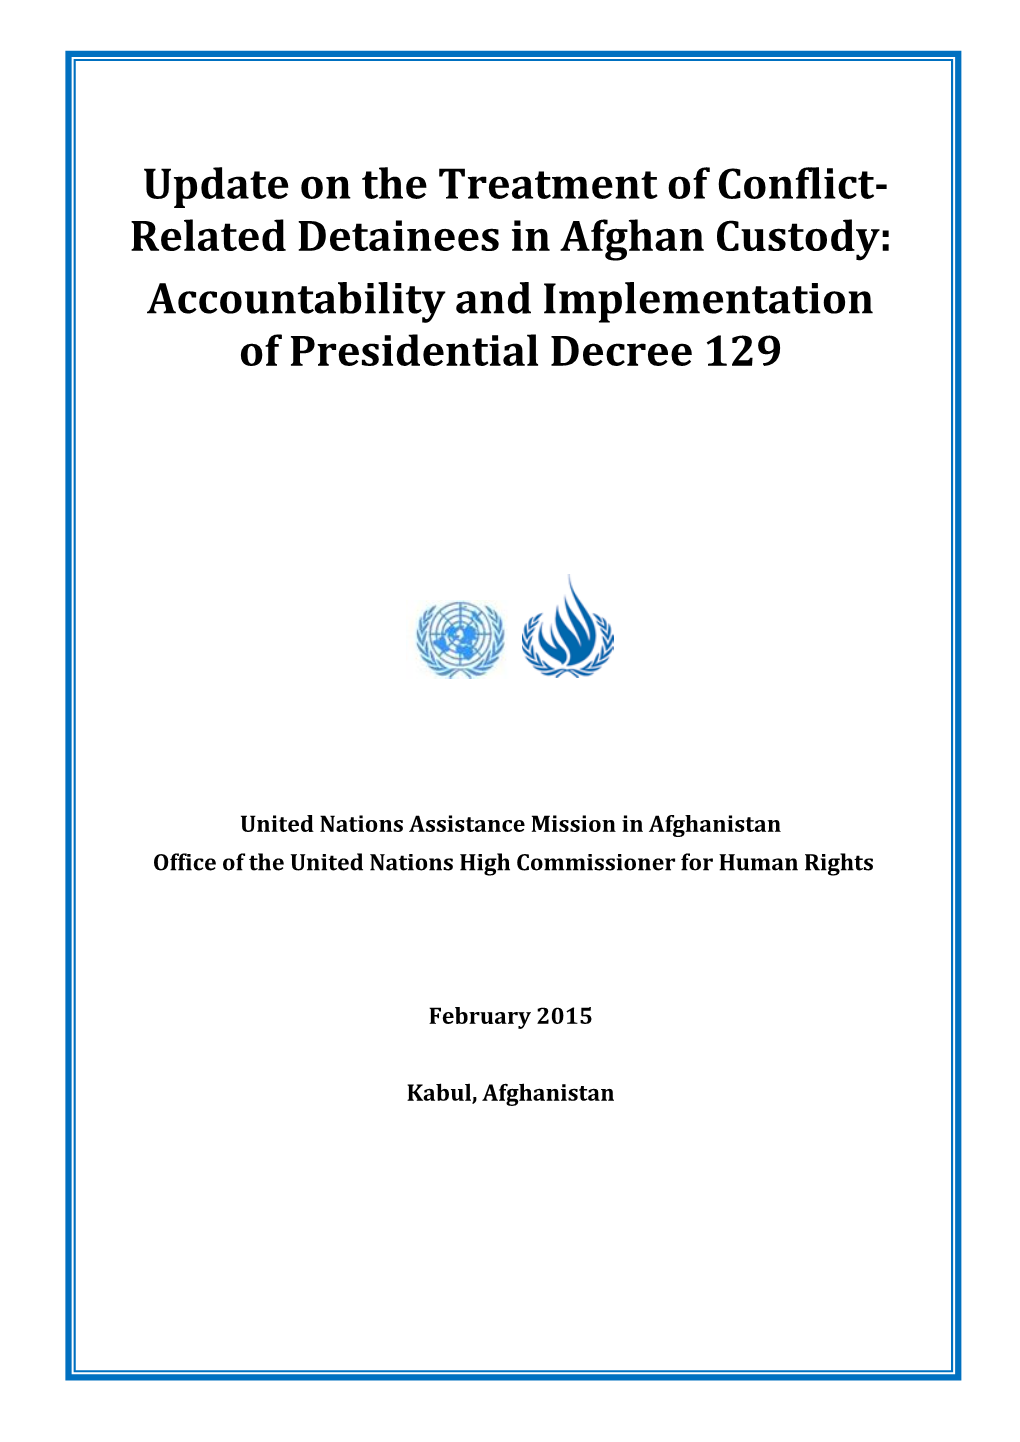 Update on the Treatment of Conflict- Related Detainees in Afghan Custody: Accountability and Implementation of Presidential Decree 129